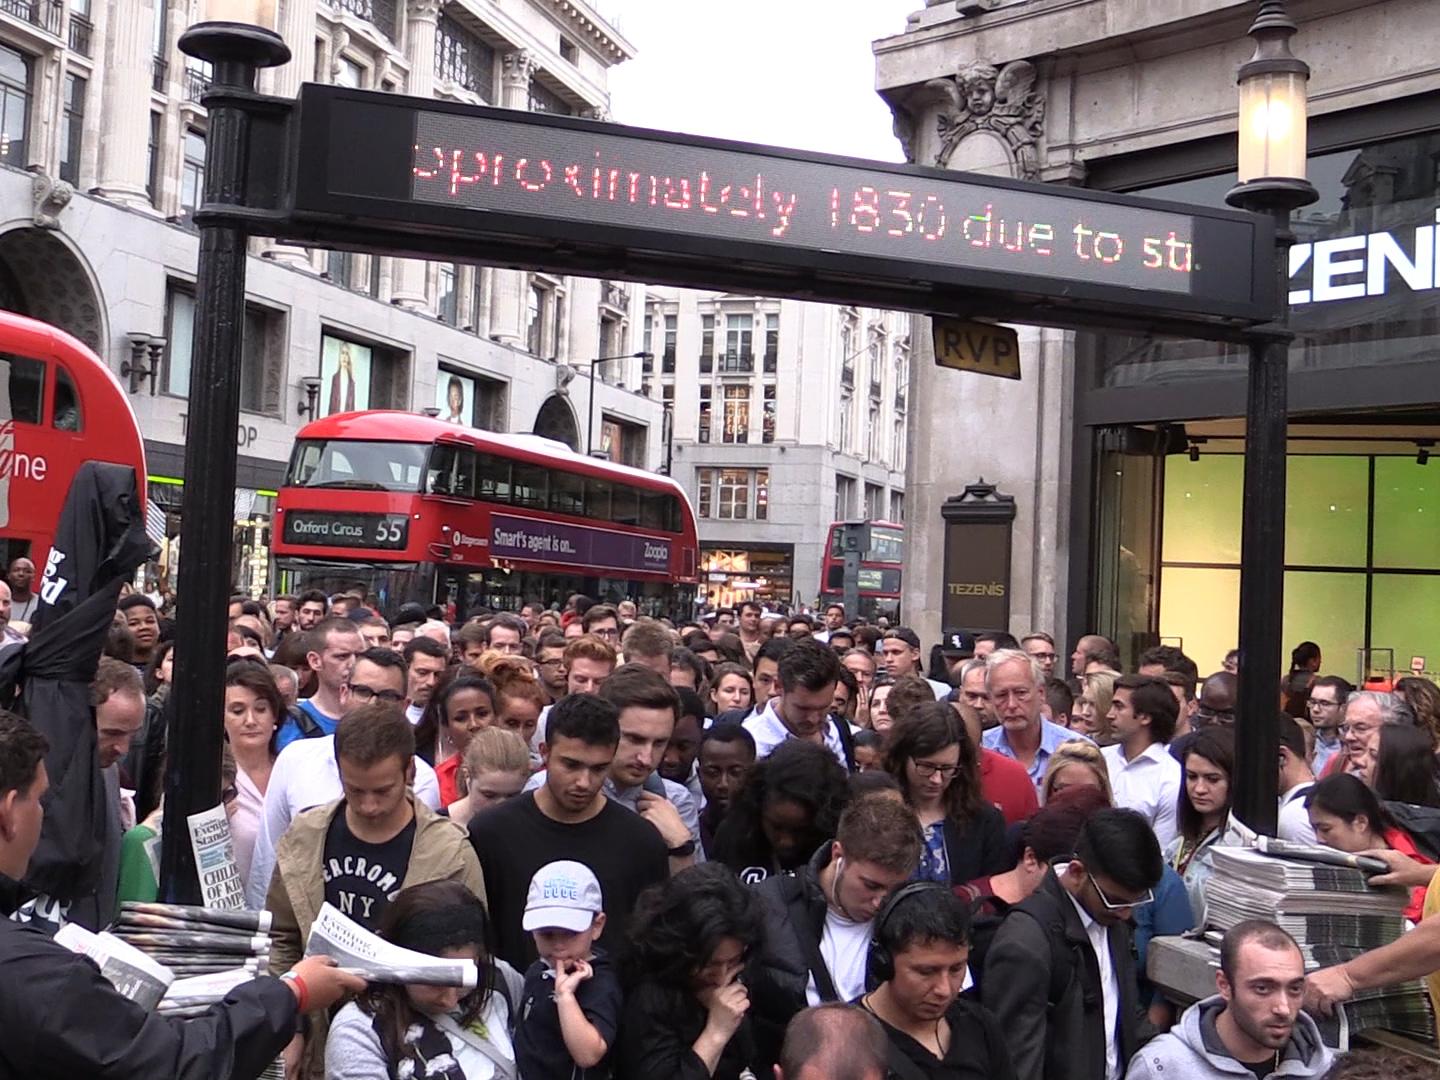 Oxford Circus comes to a standstill as overcrowding causes station to shut - just hours before the tube strike began